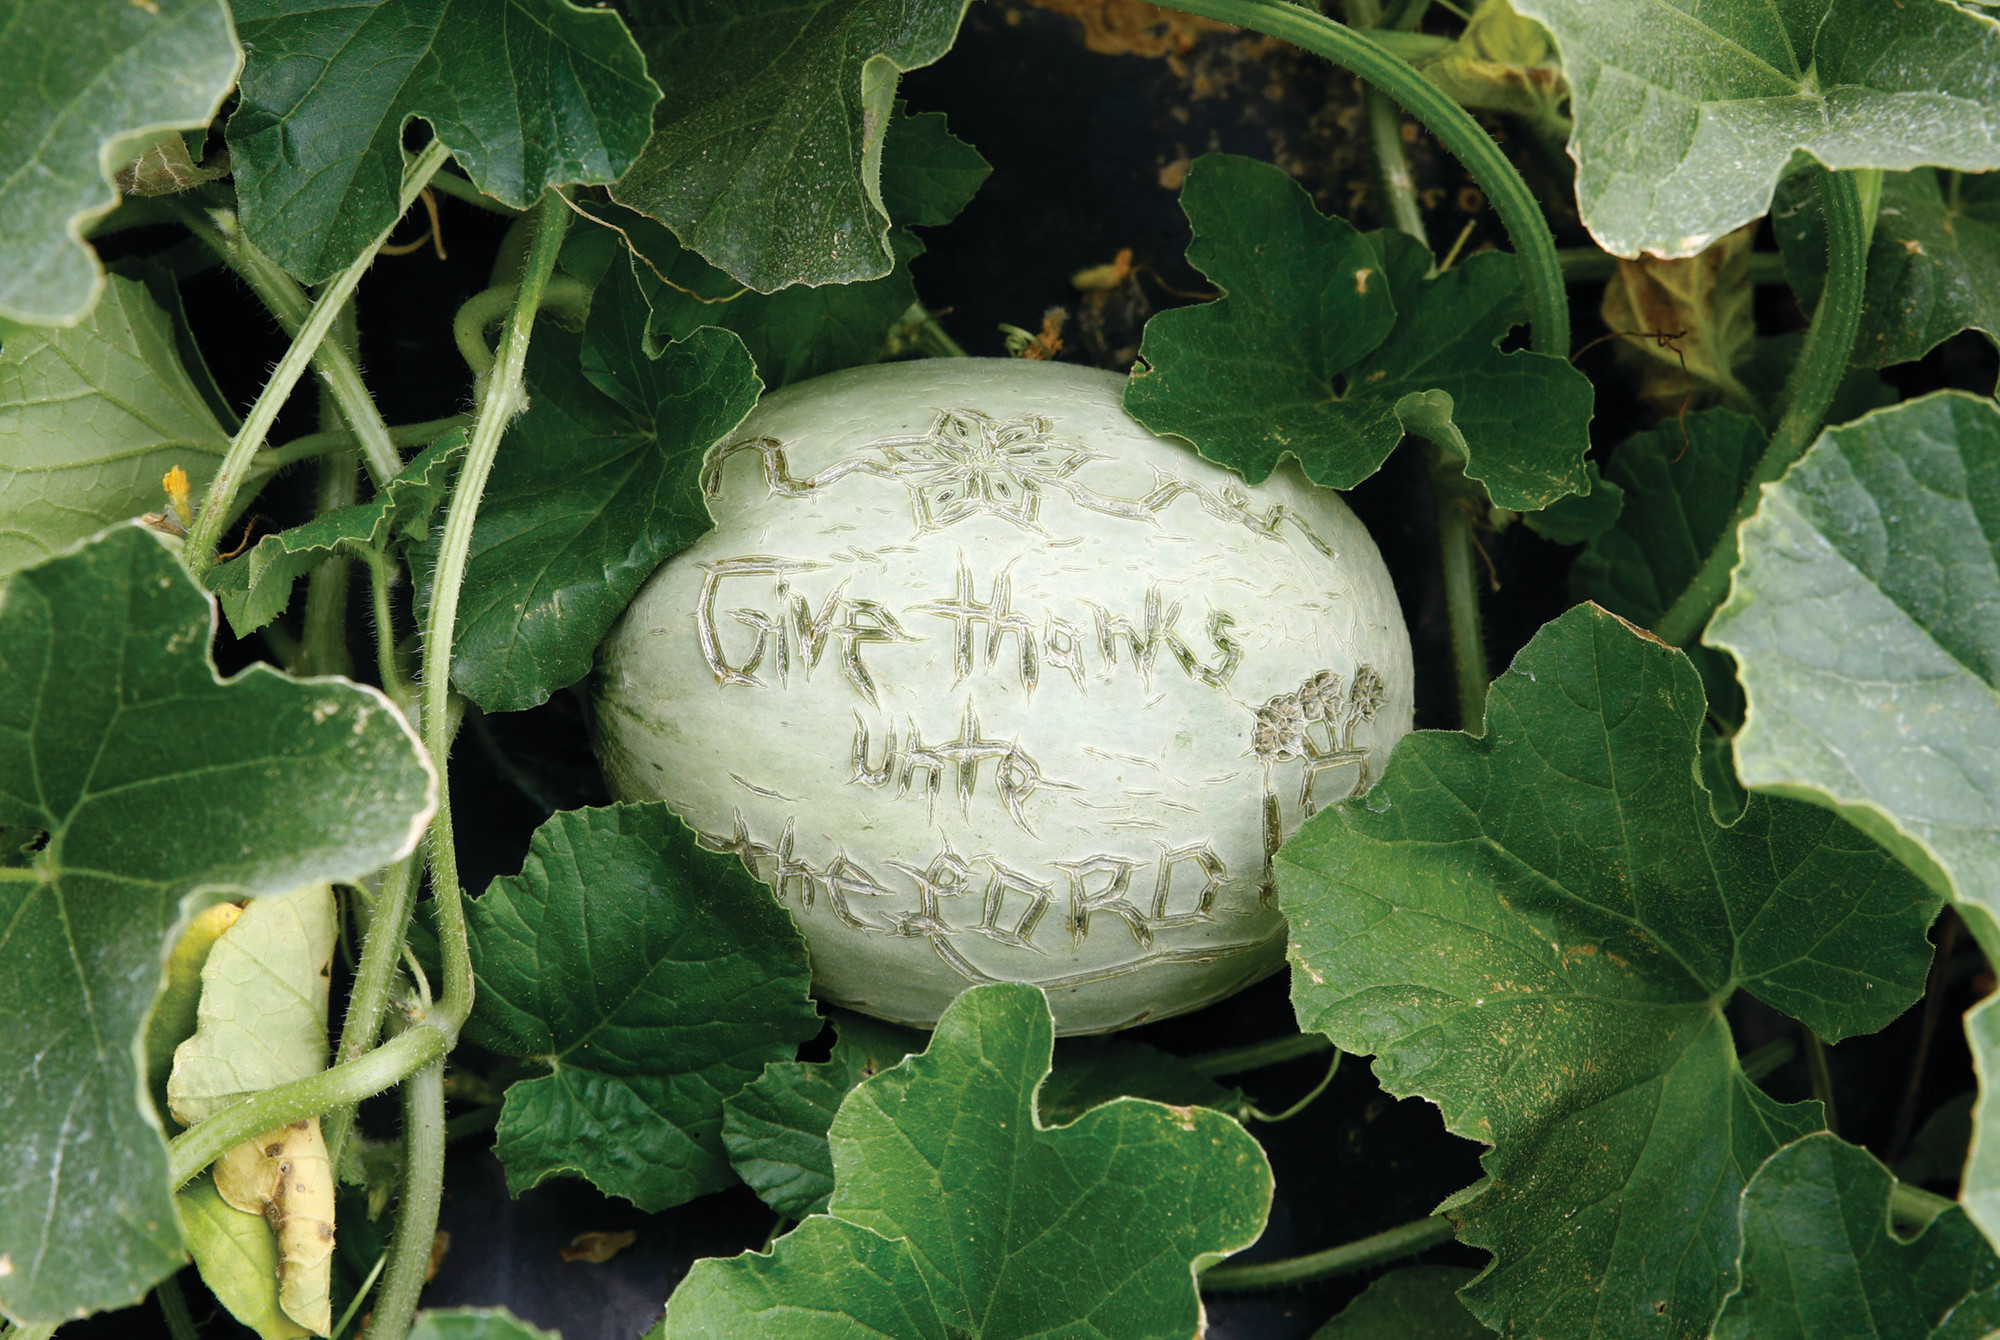 A message reading "Give thanks unto the Lord" is carved into the skin of a melon at an Old Order Mennonite family's farm in New Holland, Pennsylvania.